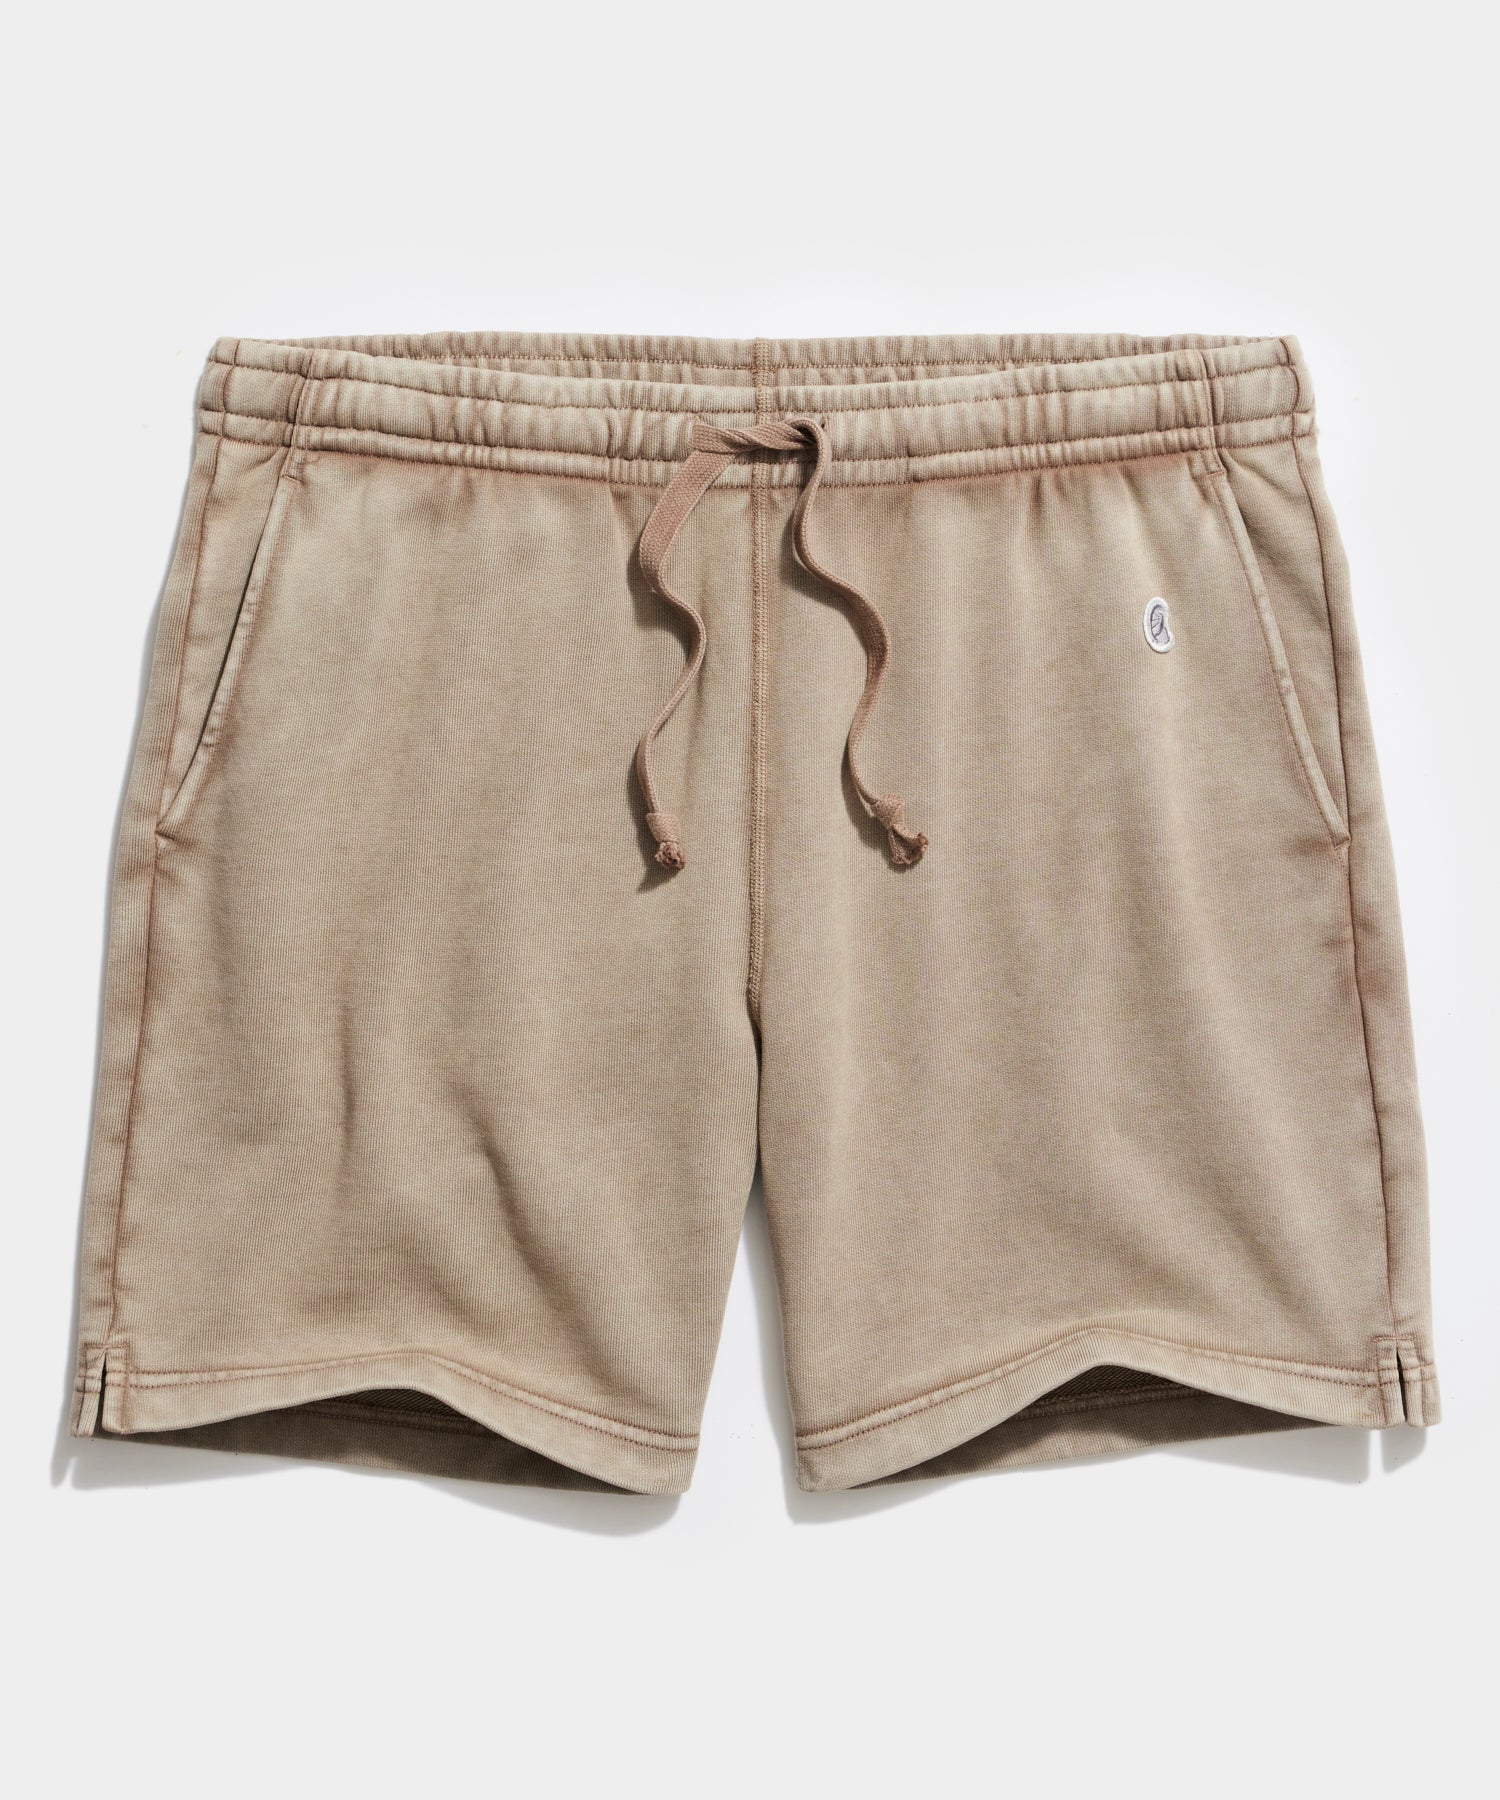 Sun-Faded 7" Midweight Warm Up Short in Toasted Almond